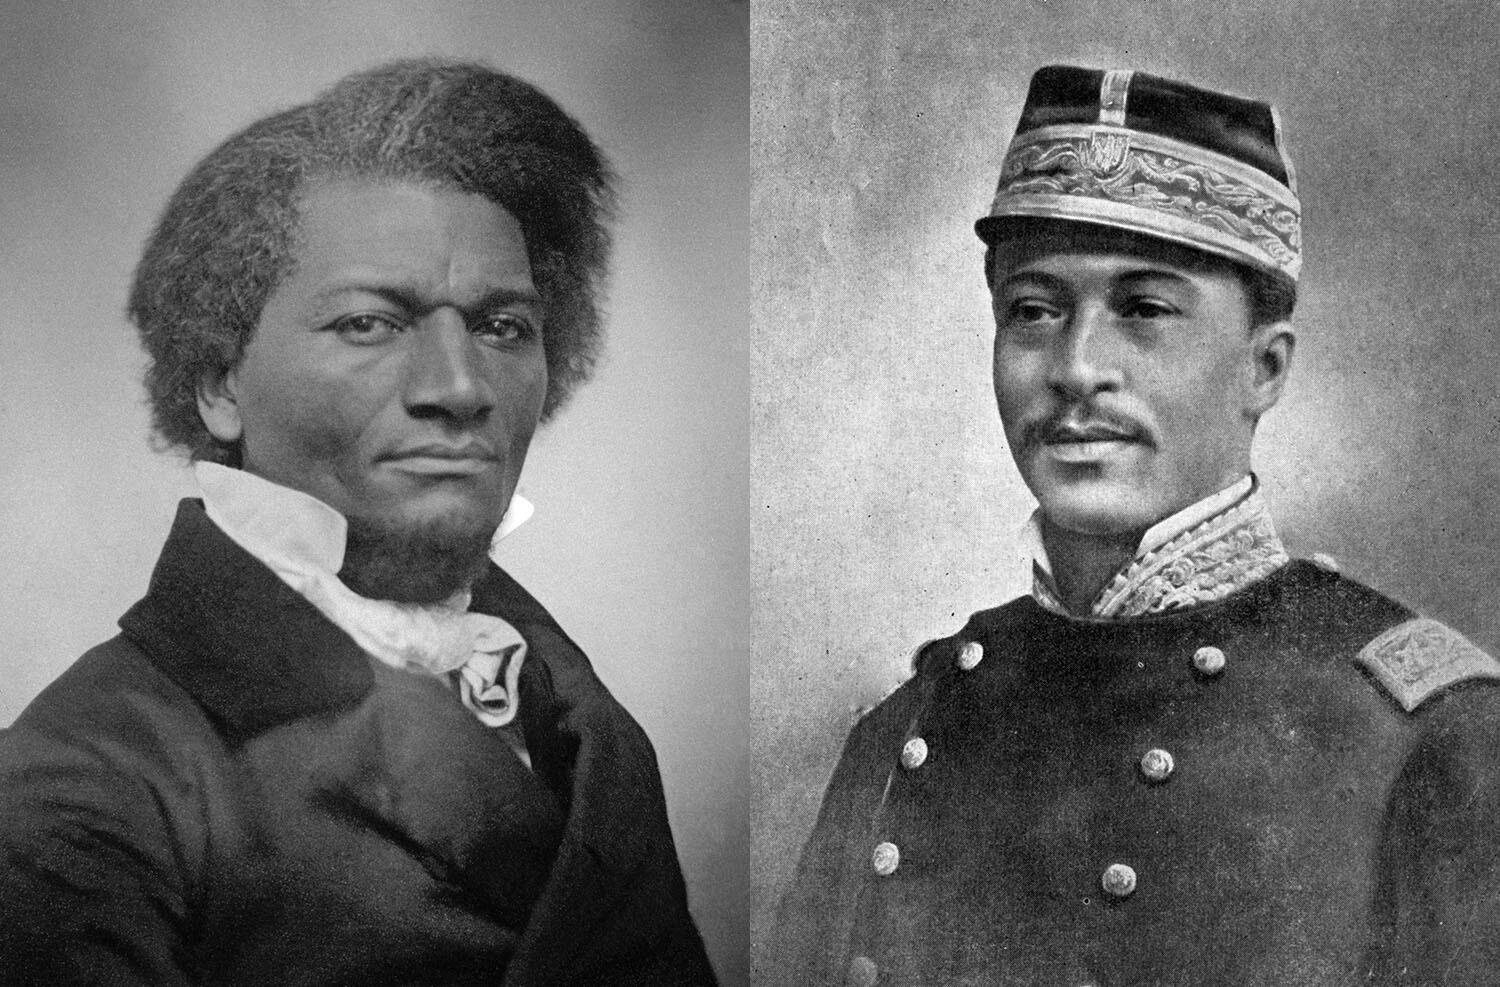 The godfathers of Gregoria Fraser, Frederick Douglass (left) and Gregorio Luperón. (Images from Wikimedia, in the public domain.)